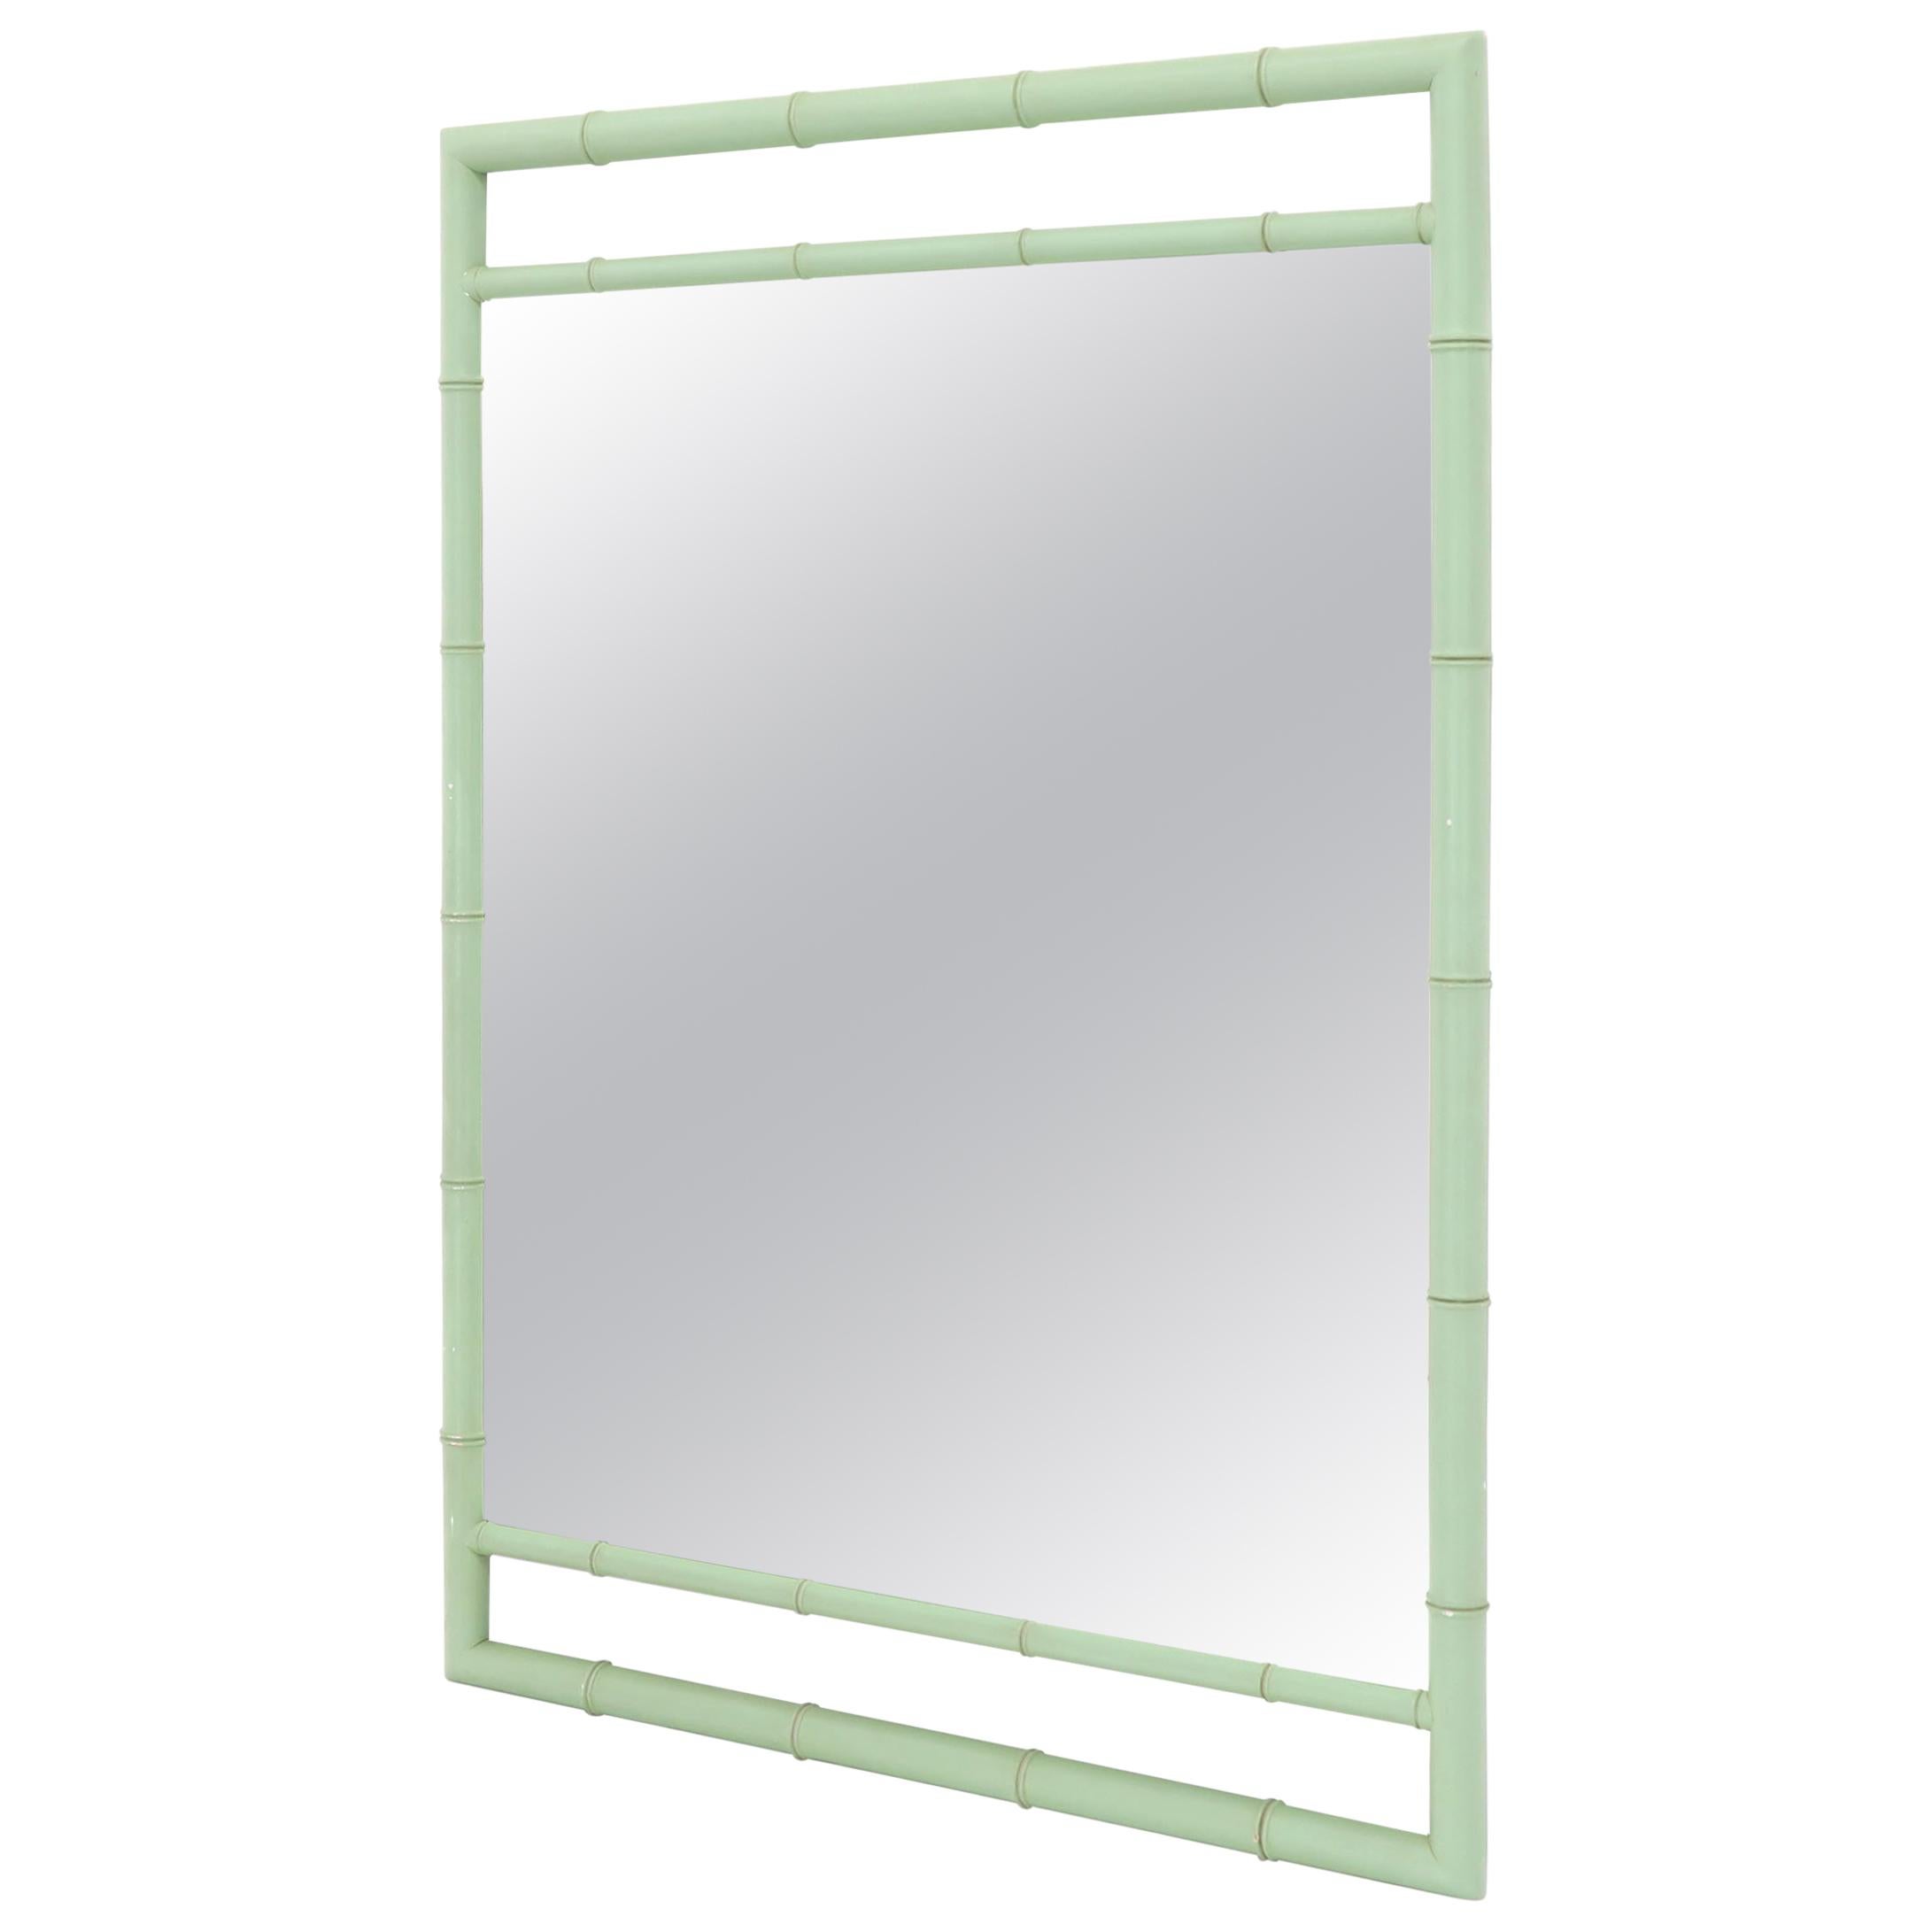 Rectangular Blue Lacquer Faux Bamboo Mirror by Kittinger Mandarin Collection